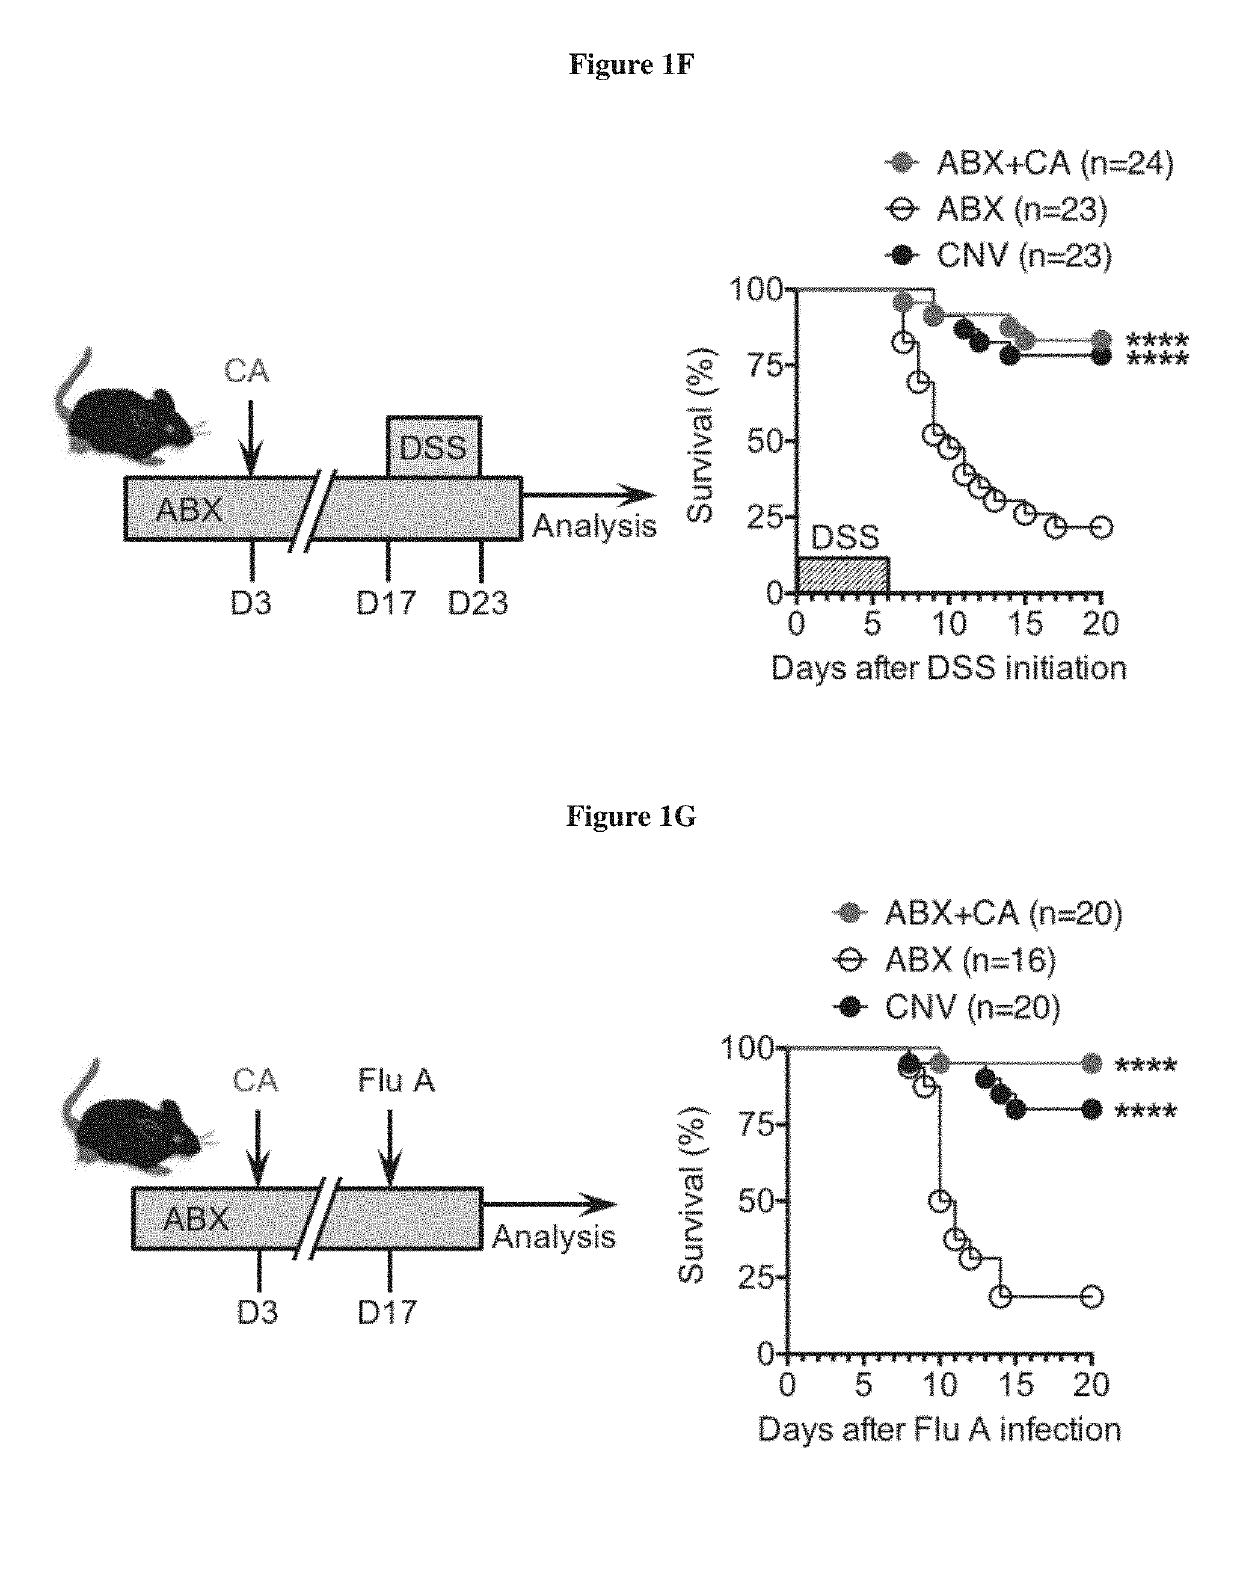 Commensal fungi and components thereof for use in modulating immune responses